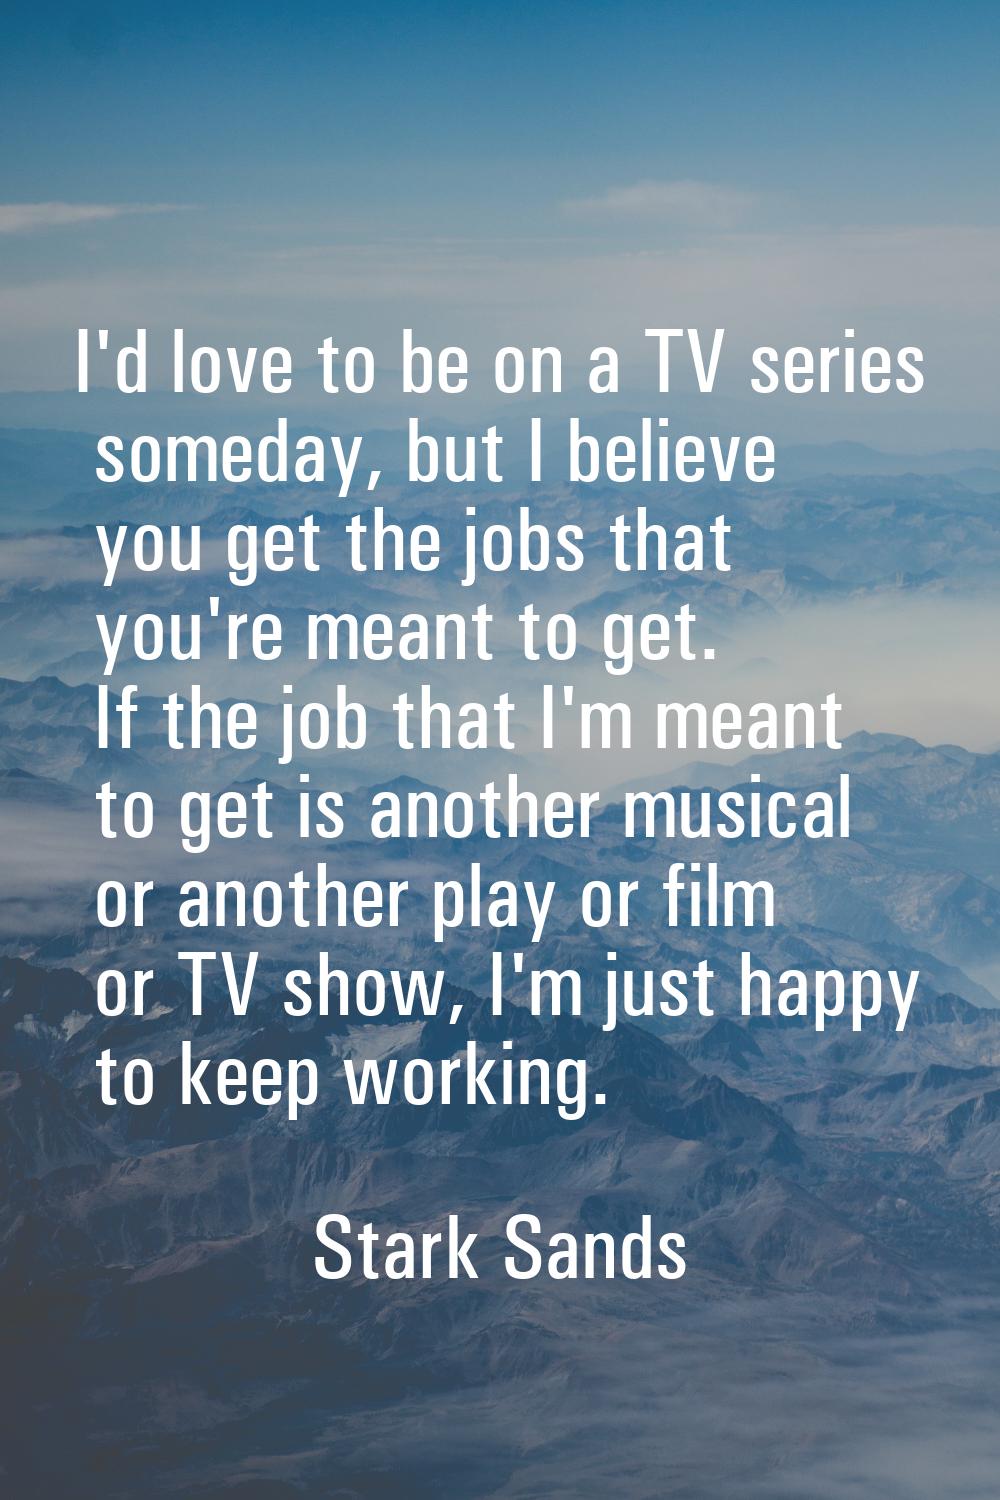 I'd love to be on a TV series someday, but I believe you get the jobs that you're meant to get. If 